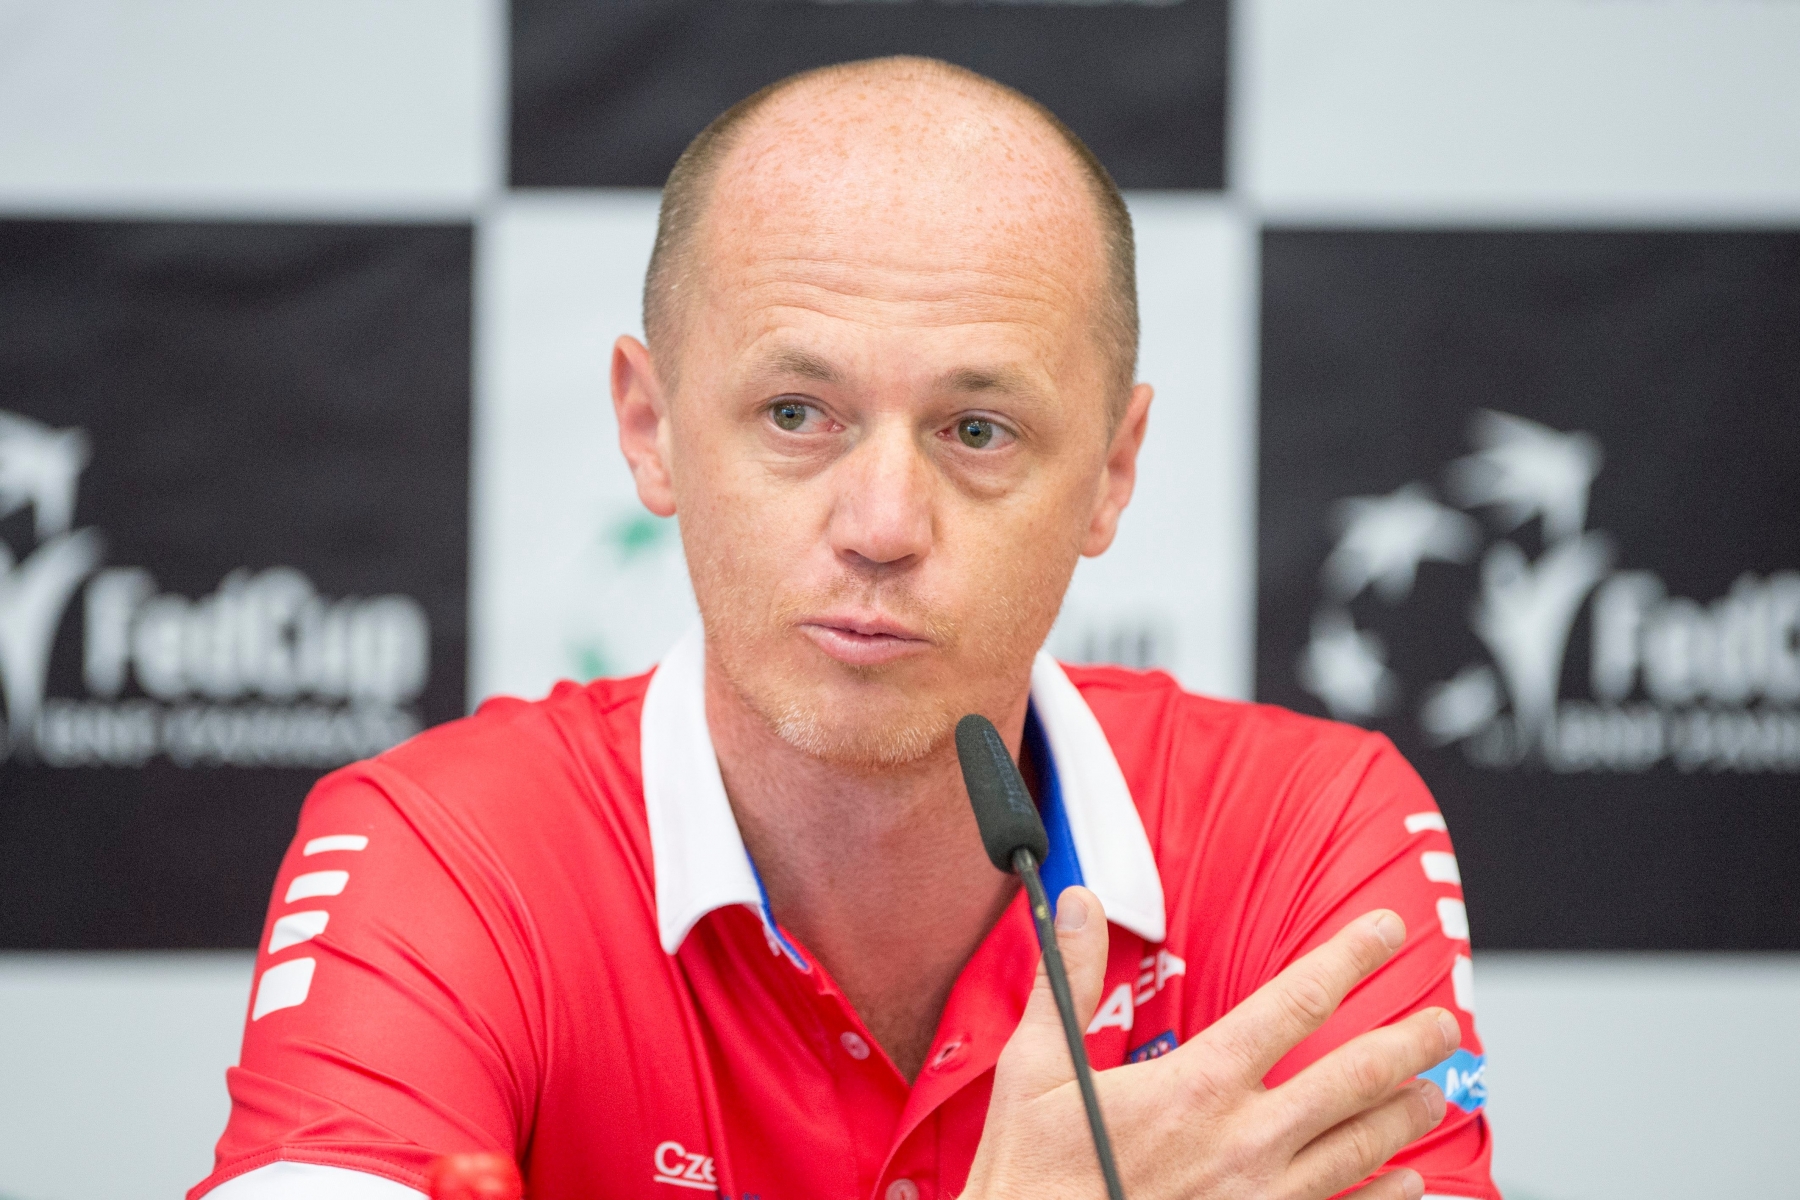 The Headcoach of the Fed Cup Czech Team Petr Pala at a press conference on Wednesday, April 13, 2016, in Lucerne, Switzeland. The Swiss Fed Cup Team will face the Czech Republic team in the Tennis World Group Semifinal Fed Cup on 16 and 17 April 2016. (KEYSTONE/Urs Flueeler) SWITZERLAND TENNIS FED CUP